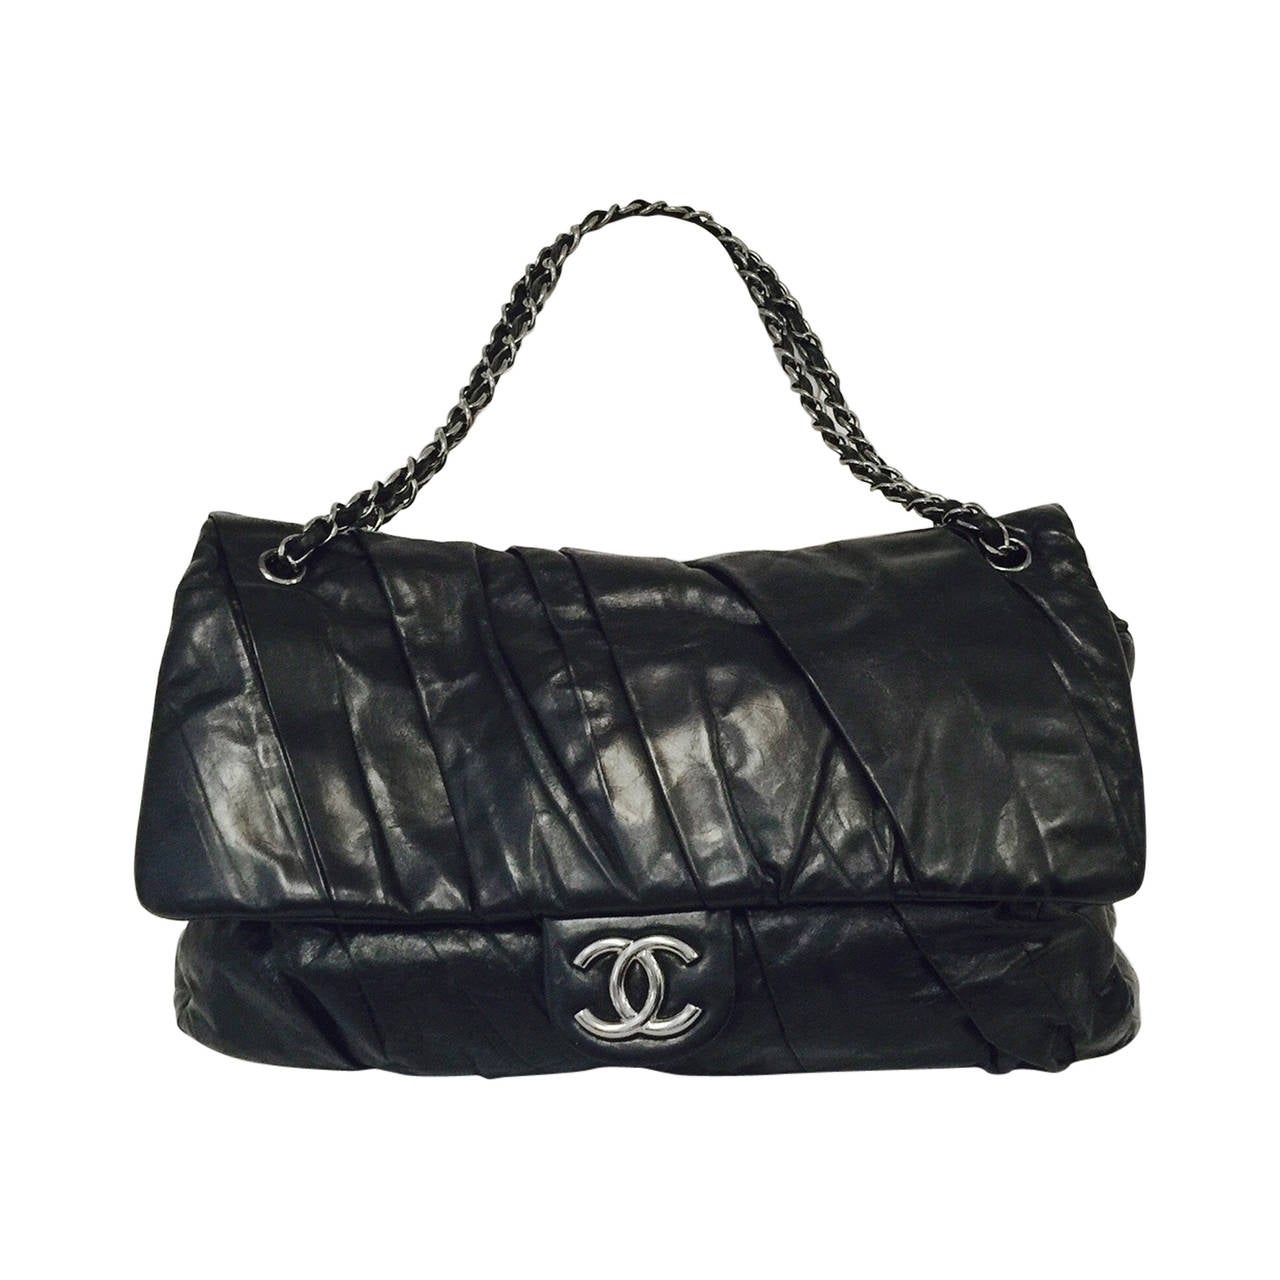 2009 Chanel Pleated Maxi Bag With Ruthenium Hardware For Sale